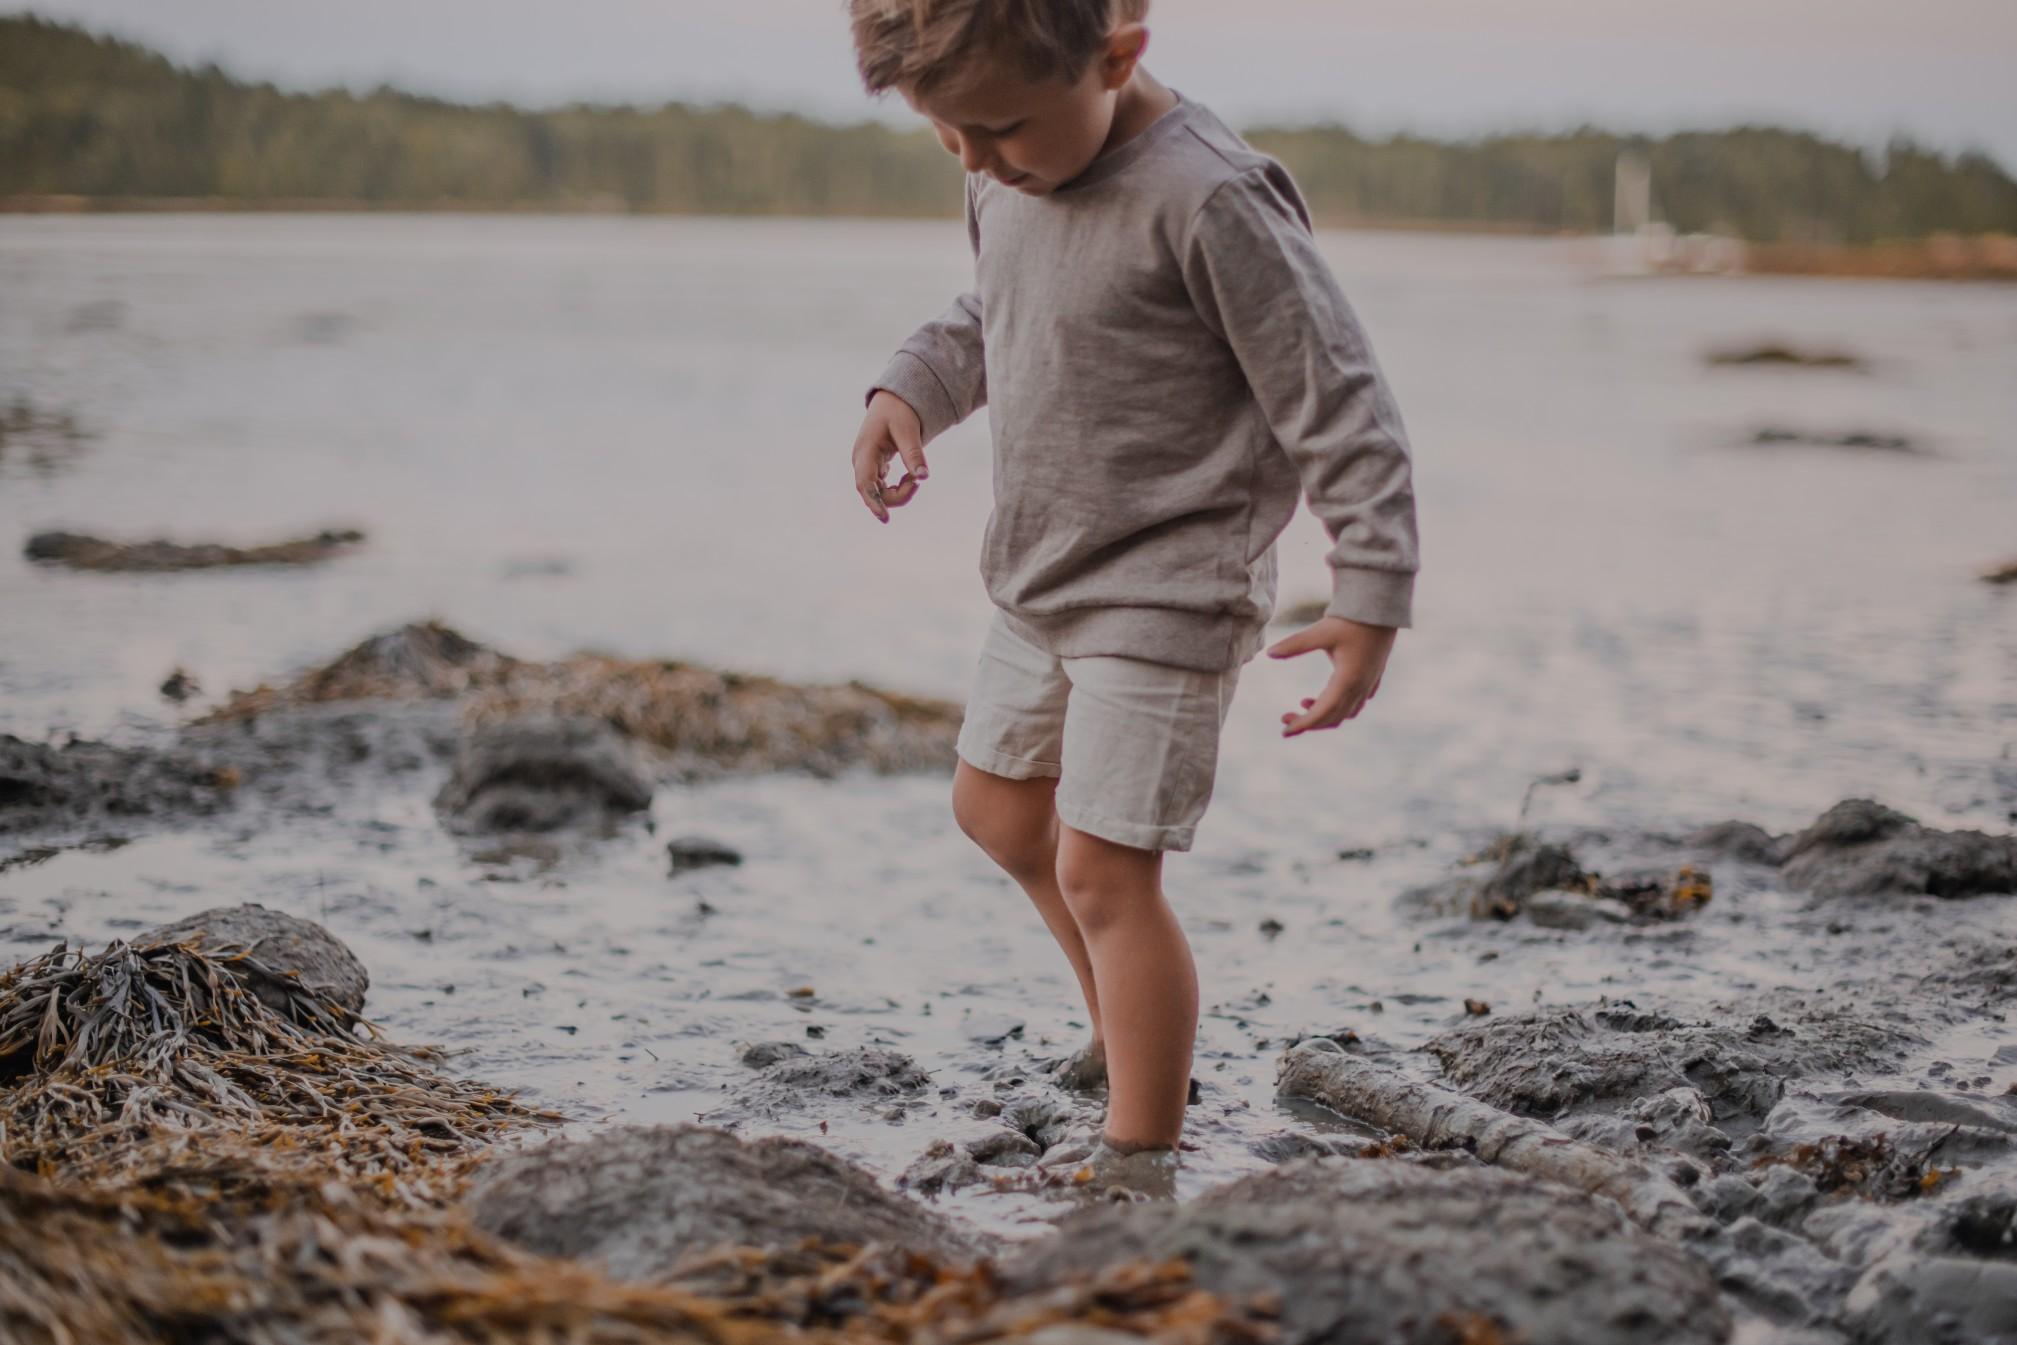 A child playing in the tidal mudflats in Maine.